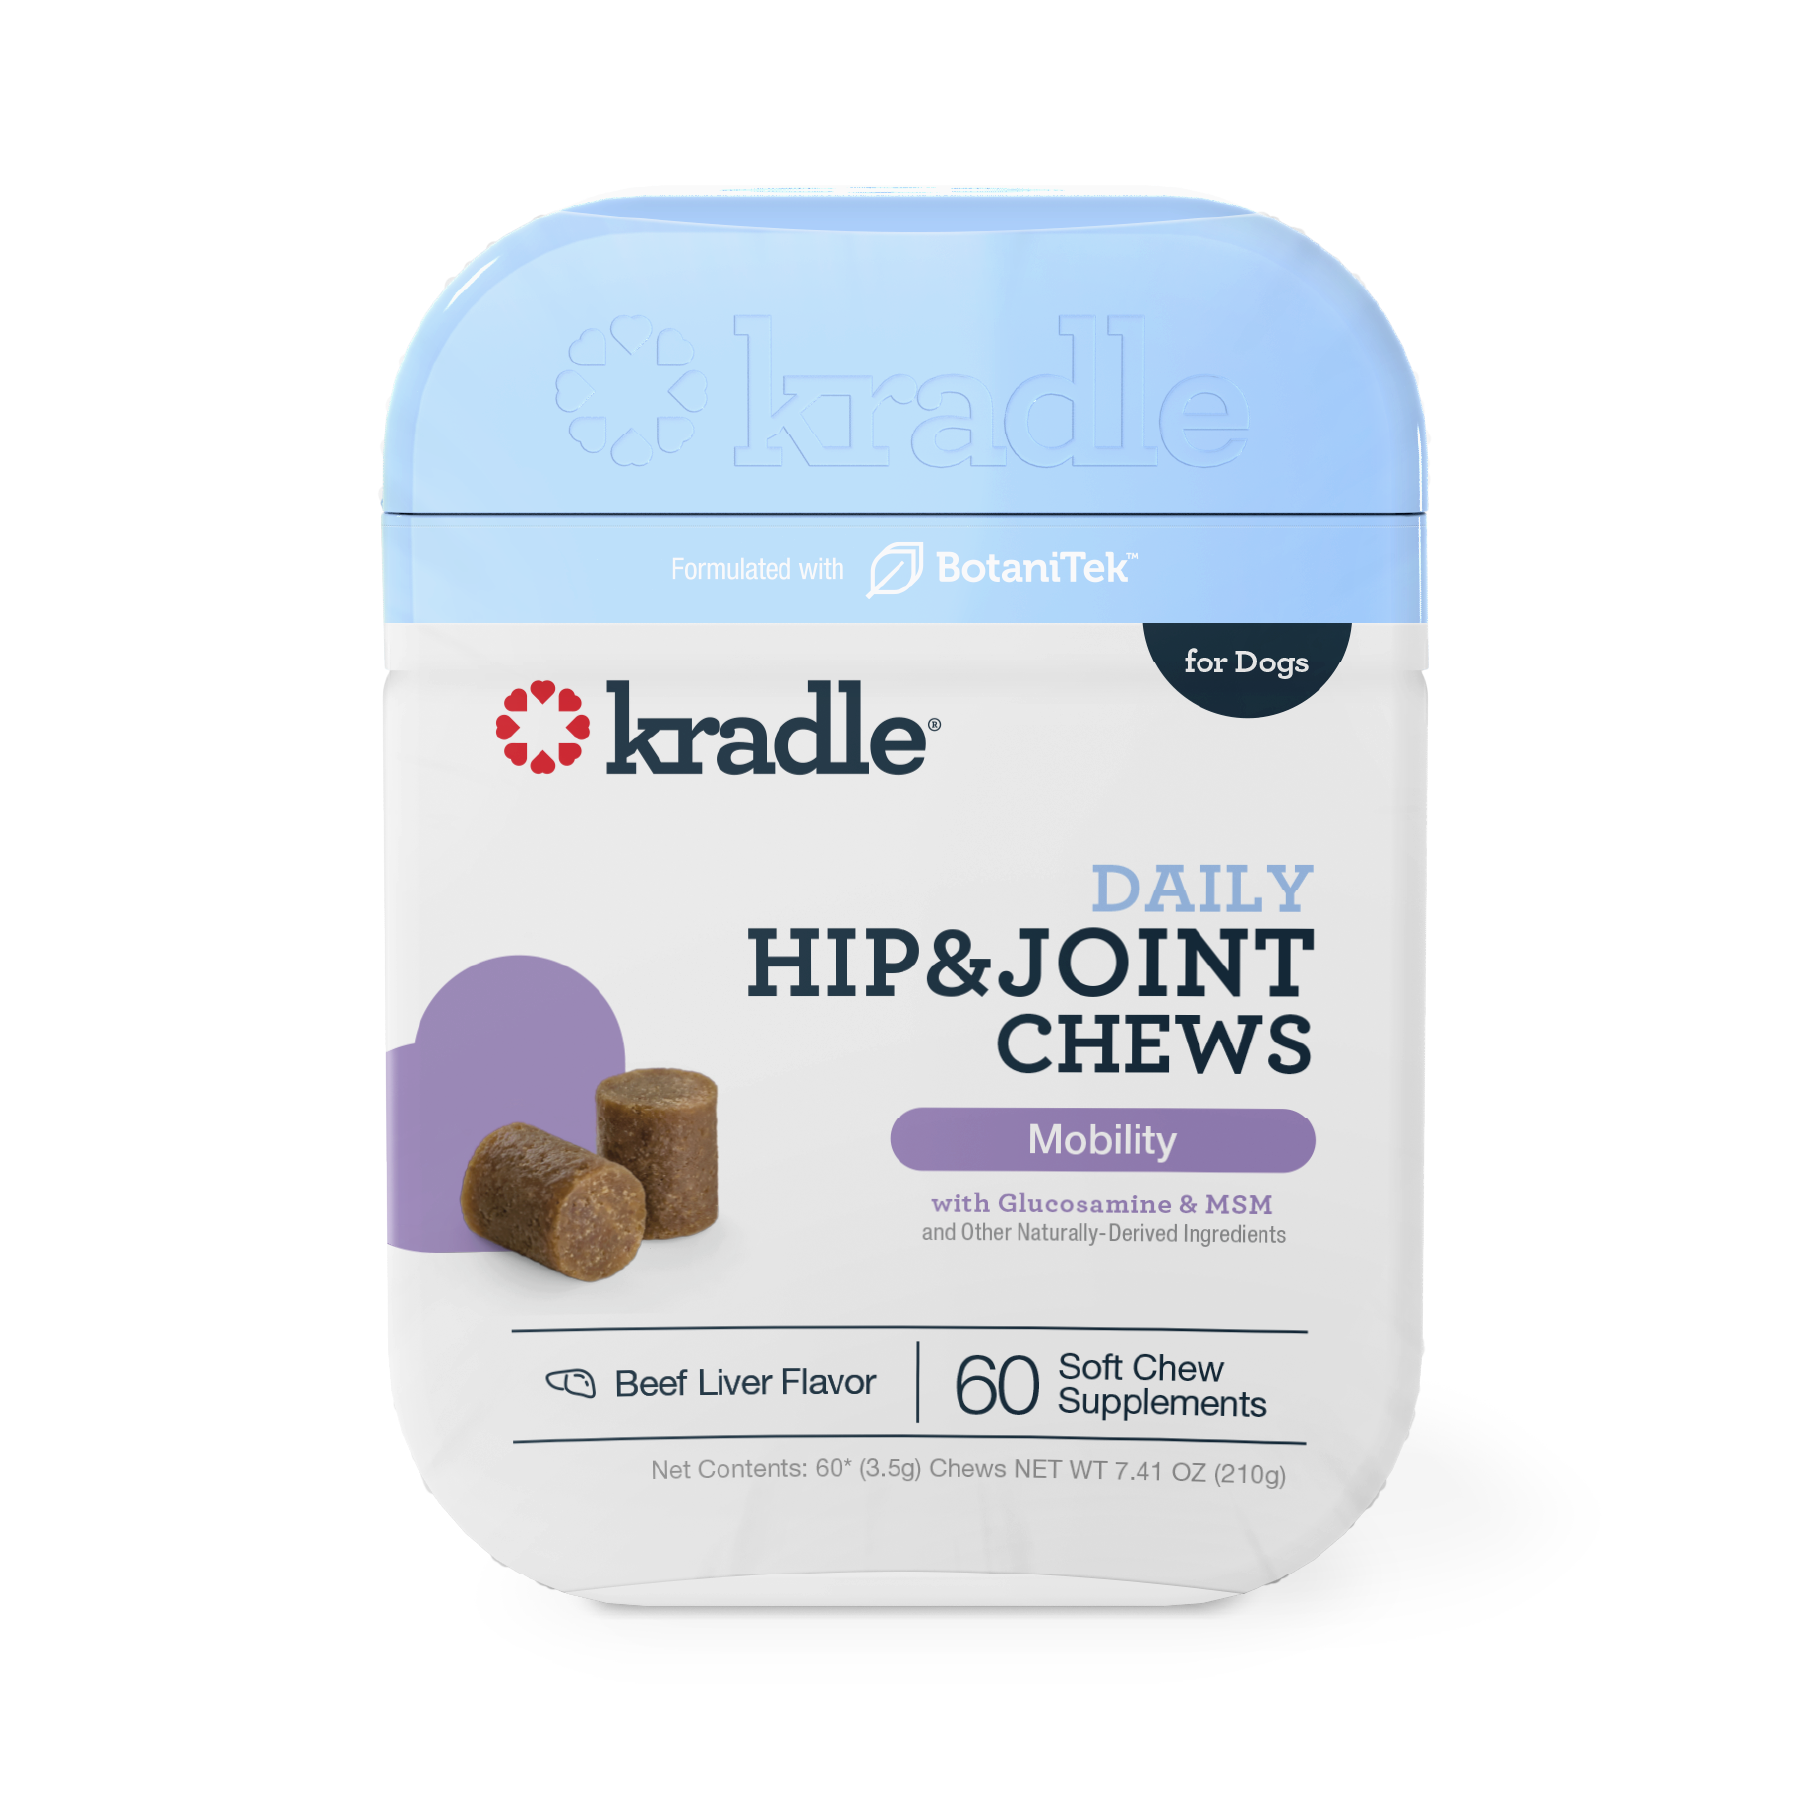 Daily Hip & Joint Chews